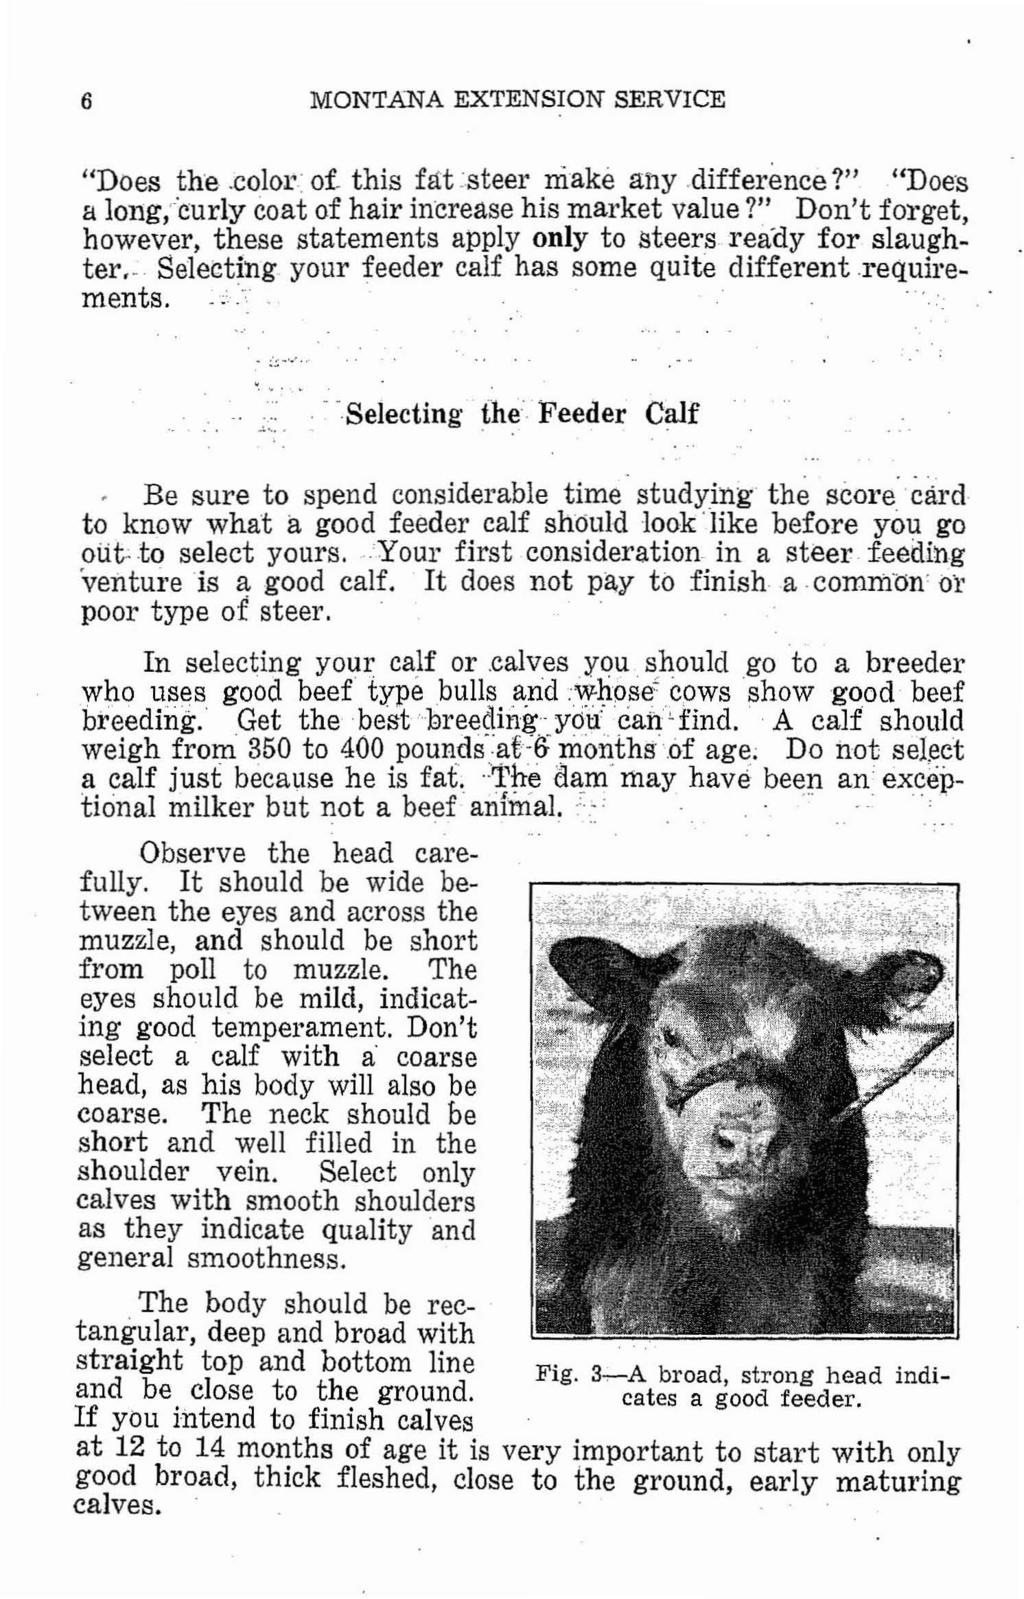 6 MONTANA EXTENSION SERVICE "Does the.color of. this fat ~steer make any.difference?" "Does a l0l1g/curly coat of hair in-crease his market value?